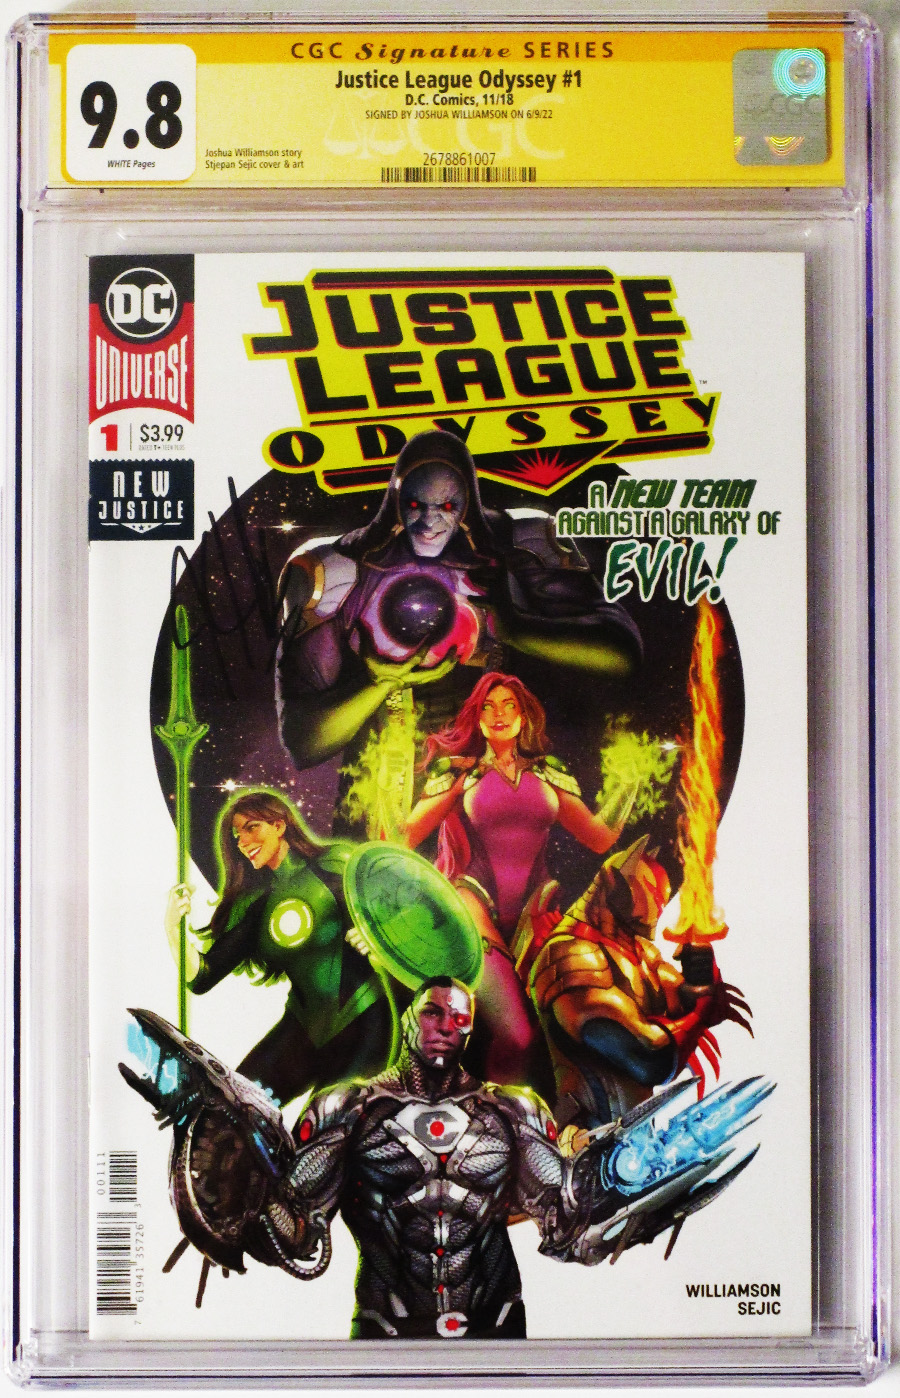 Justice League Odyssey #1 Cover D Regular Stjepan Sejic Cover Signed By Joshua Williamson CGC 9.8